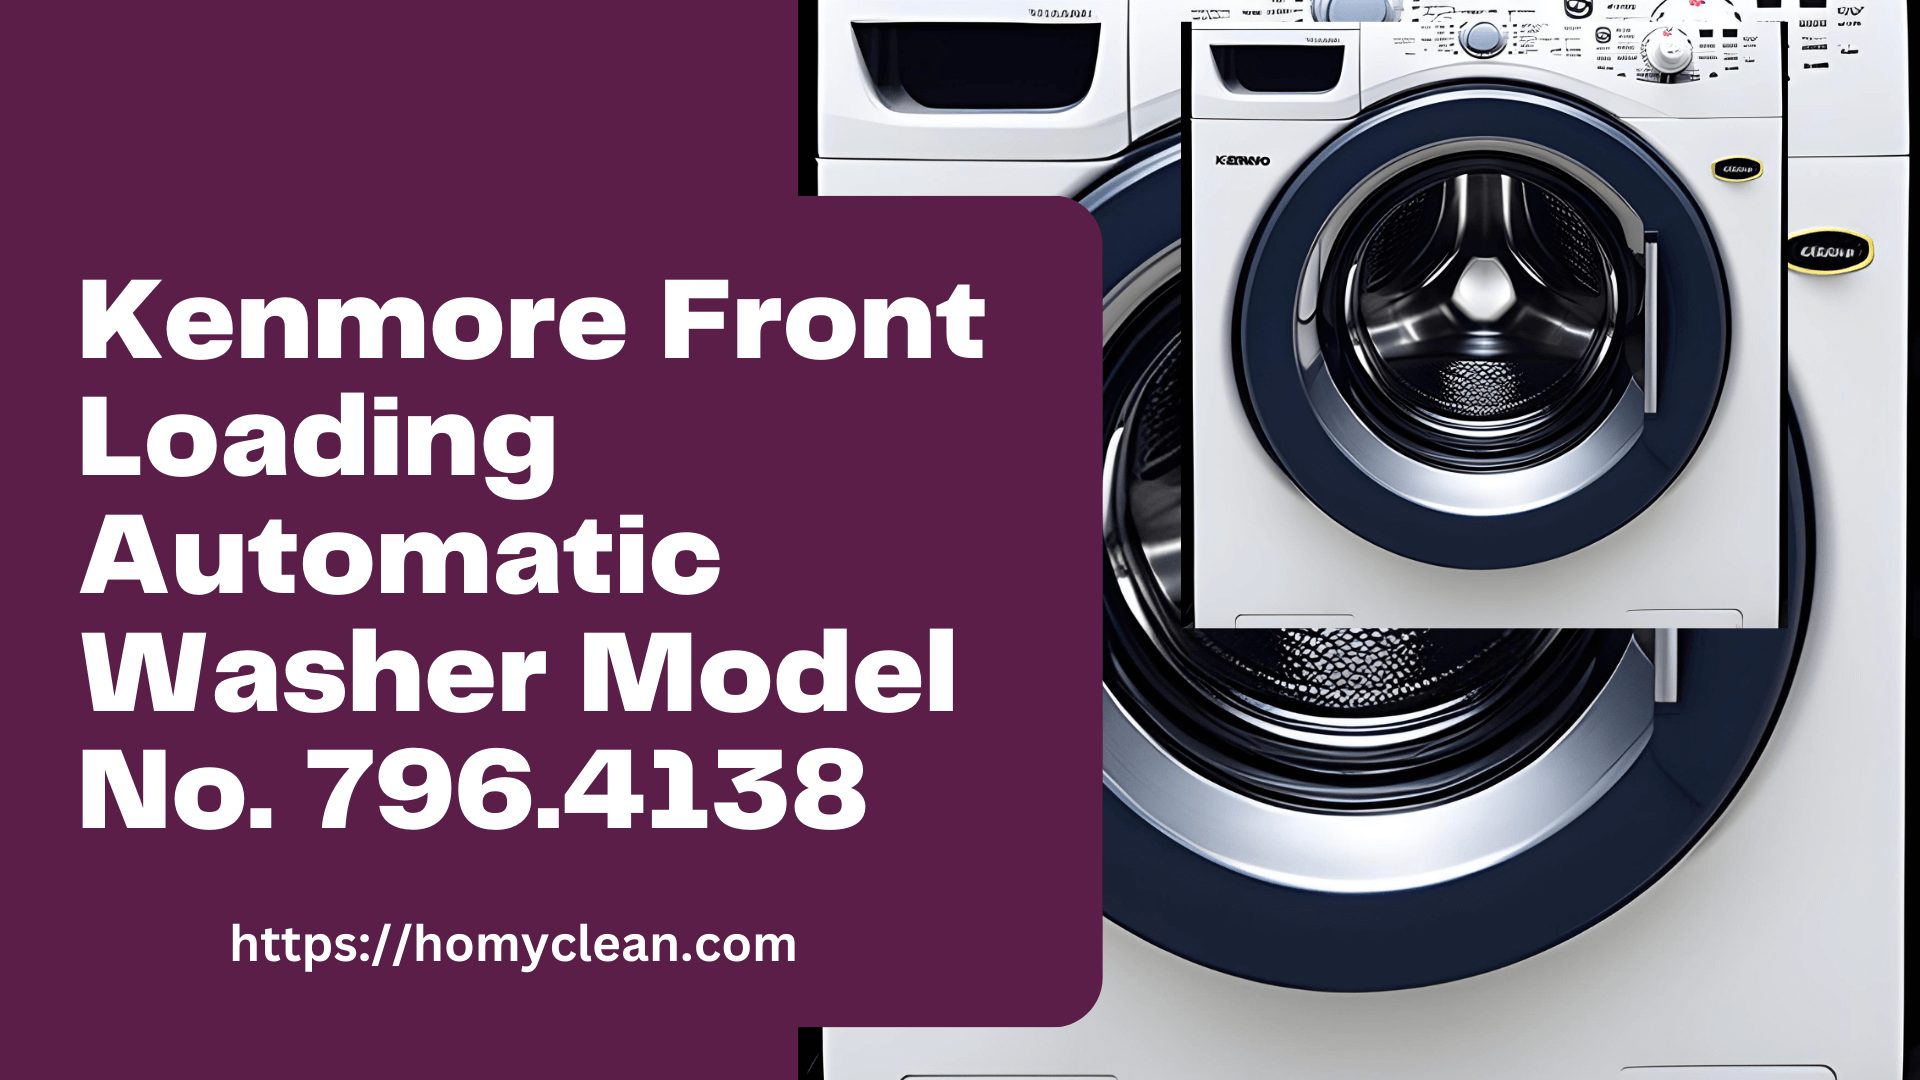 The Kenmore Front Loading Automatic Washer Model No. 796.4138 fails to start when the button is pushed